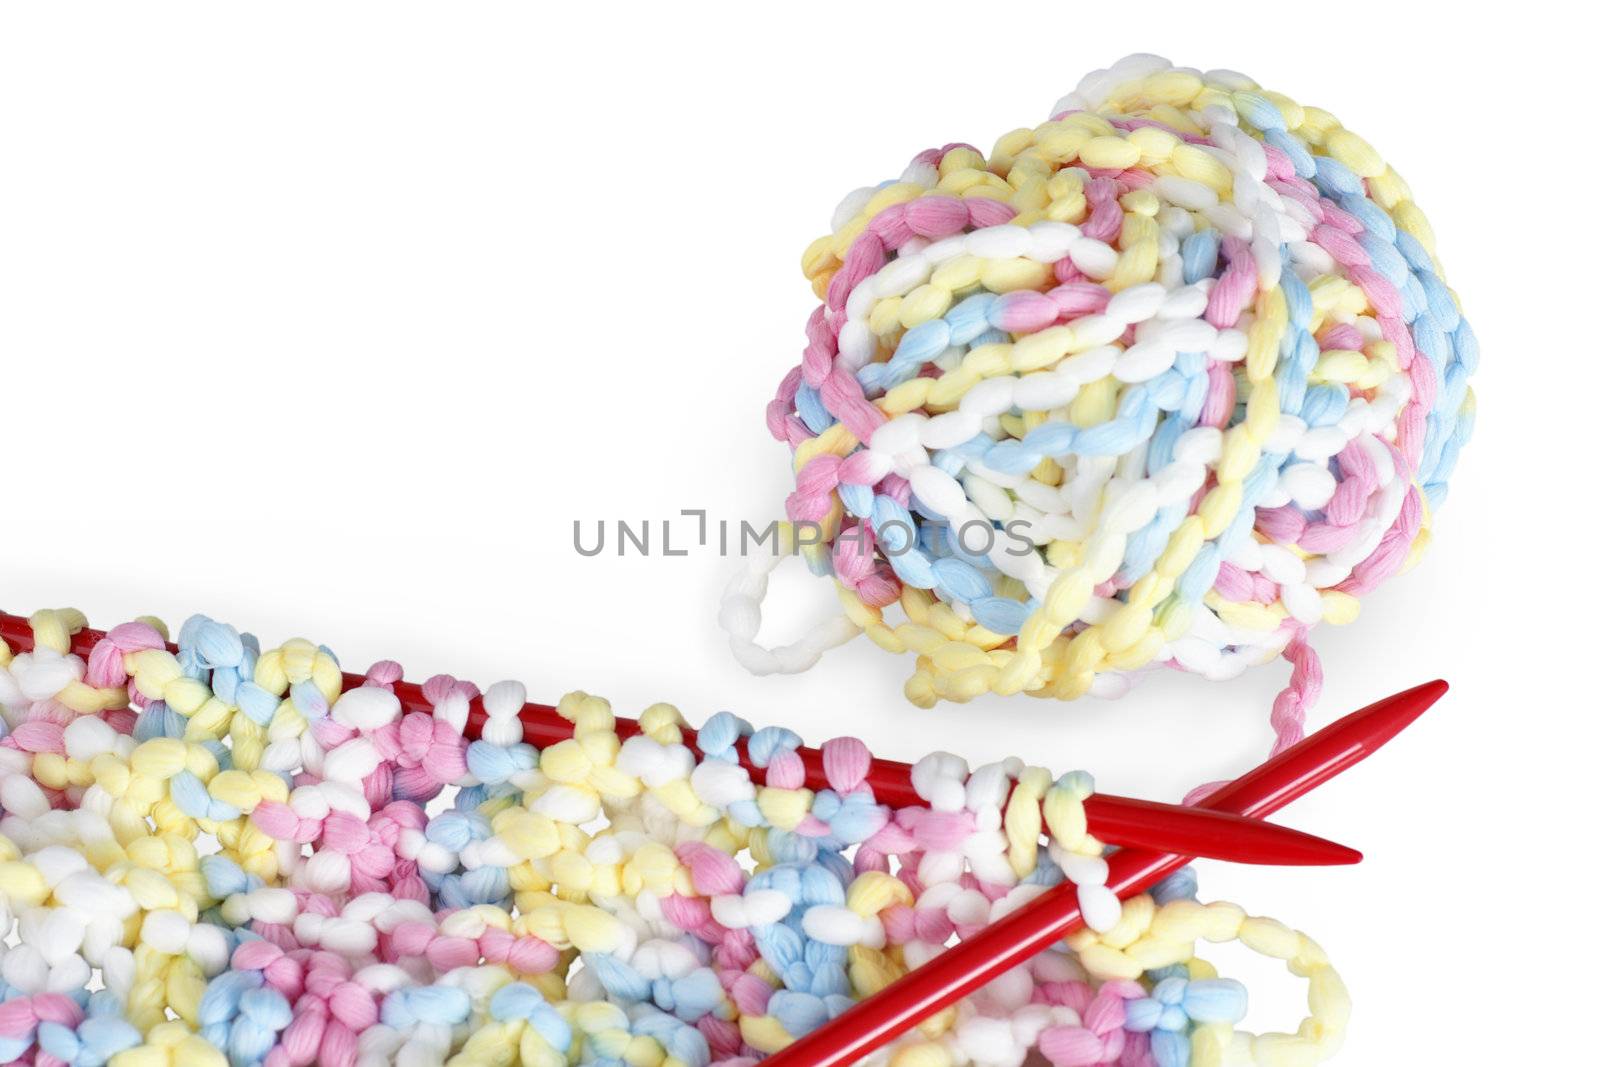 Beautiful baby or arts and crafts knitting background with red needles, pastel or baby colors wool or yarn.